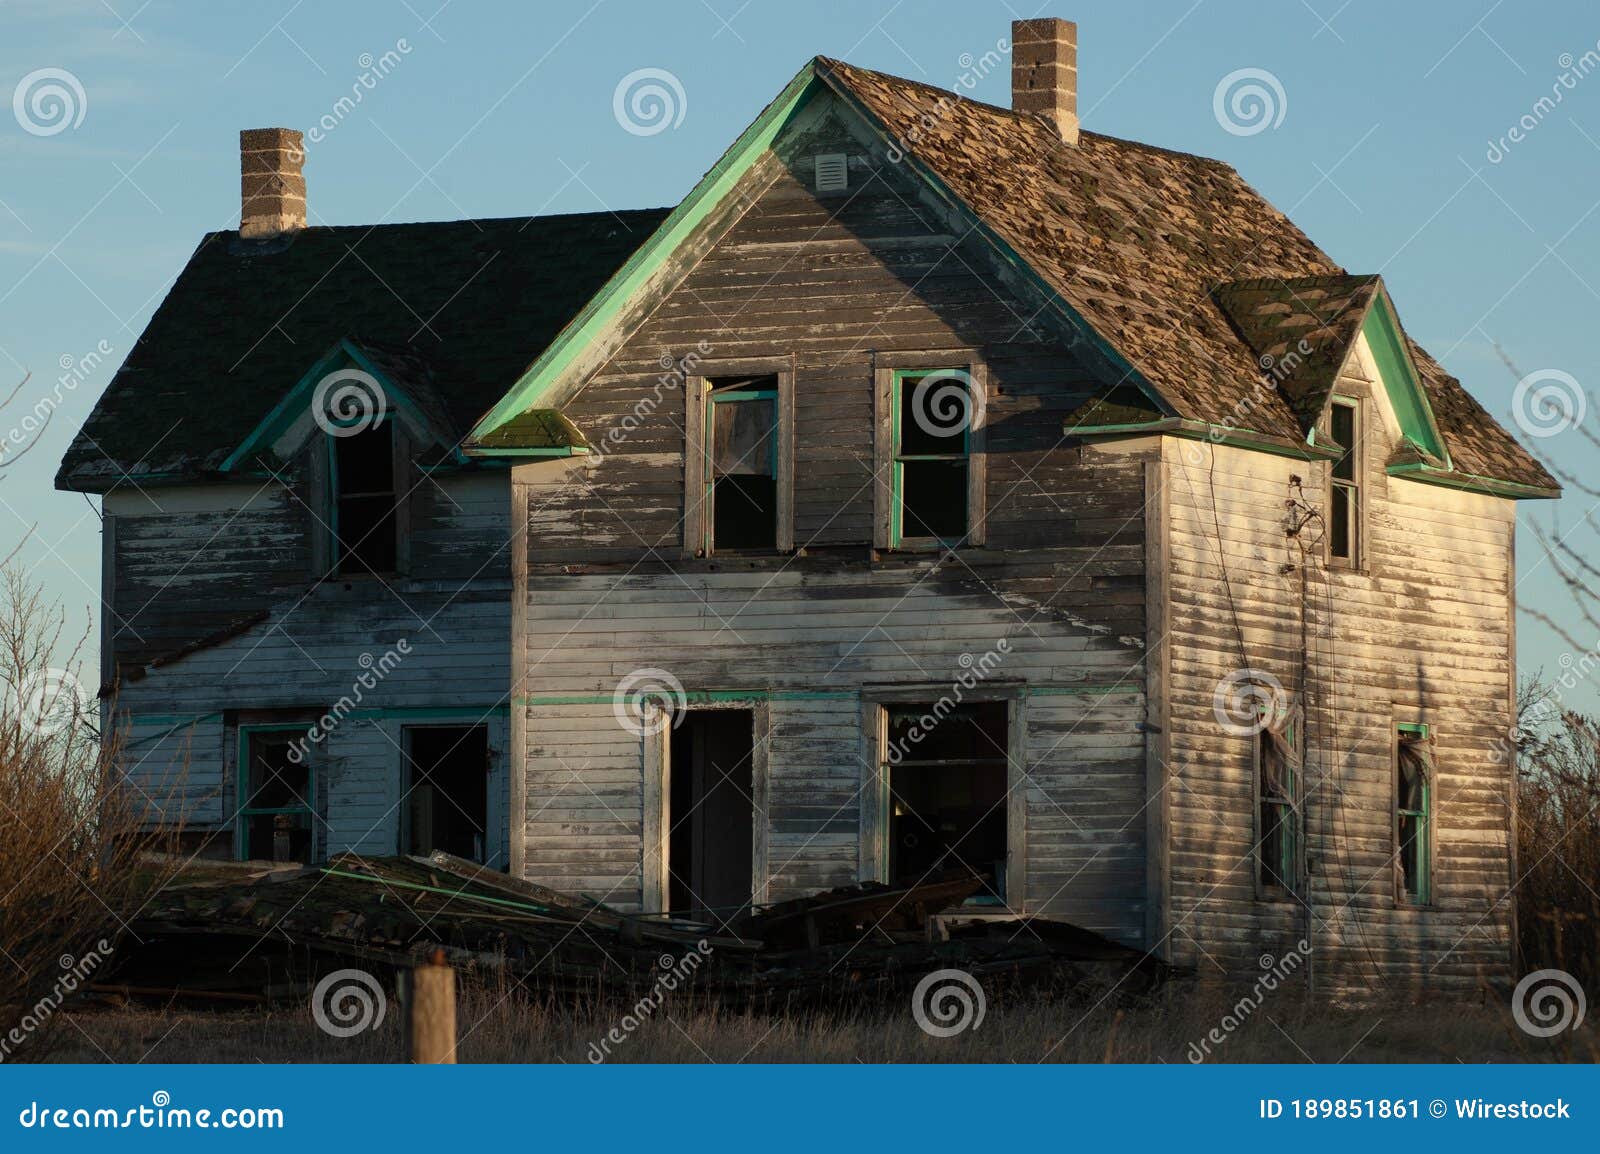 creepy, old and aged abandoned wooden house in a field under the blue sky